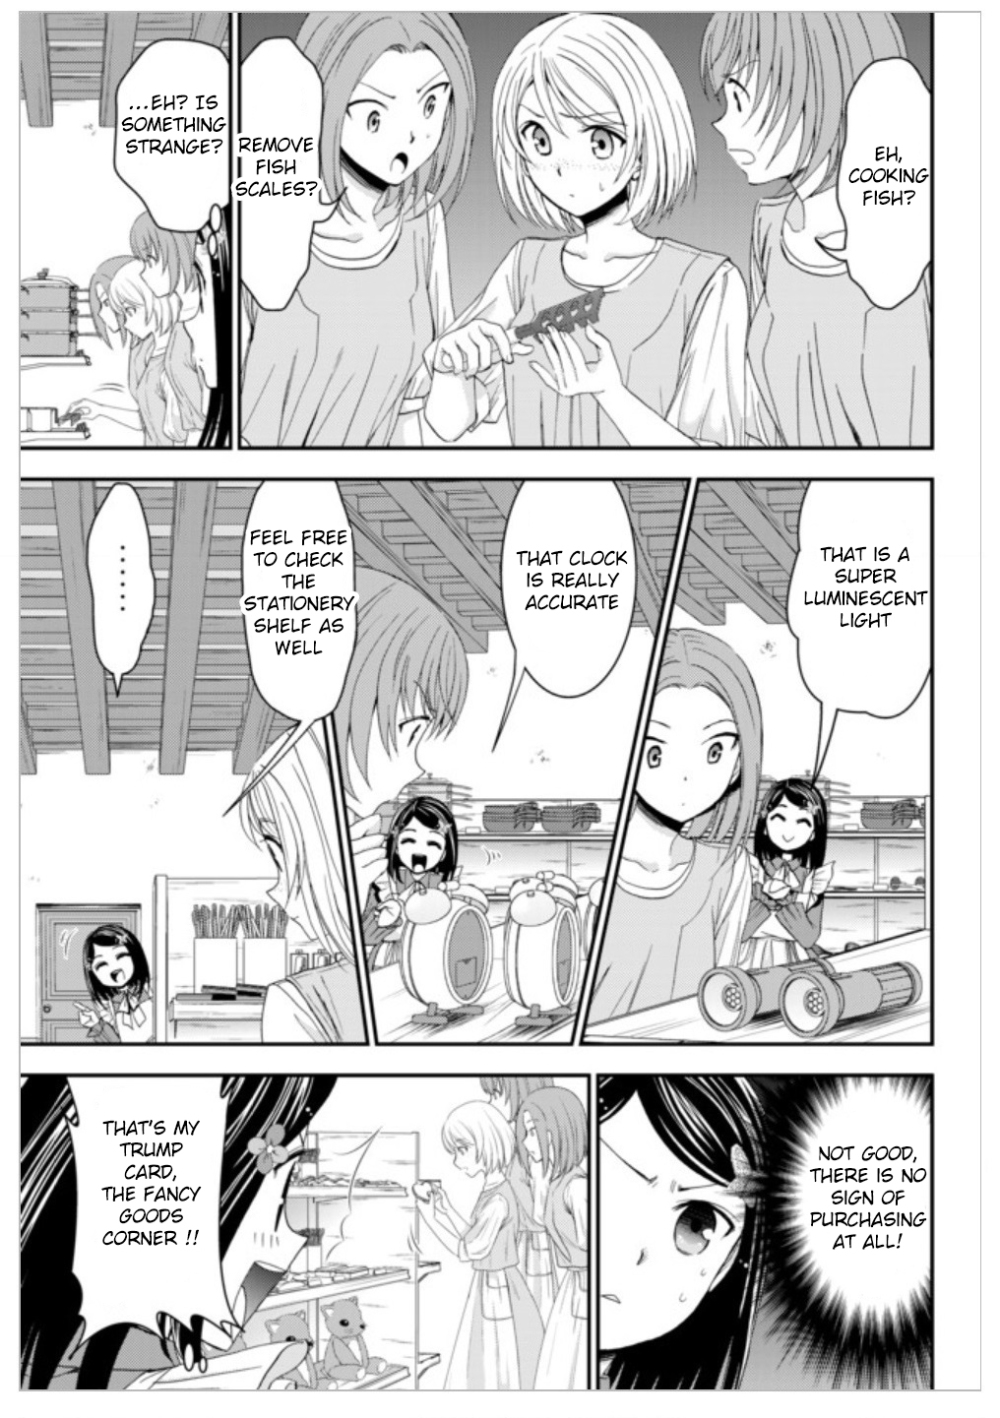 Saving 80,000 Gold Coins in the Different World for My Old Age Vol. 2 Ch. 11